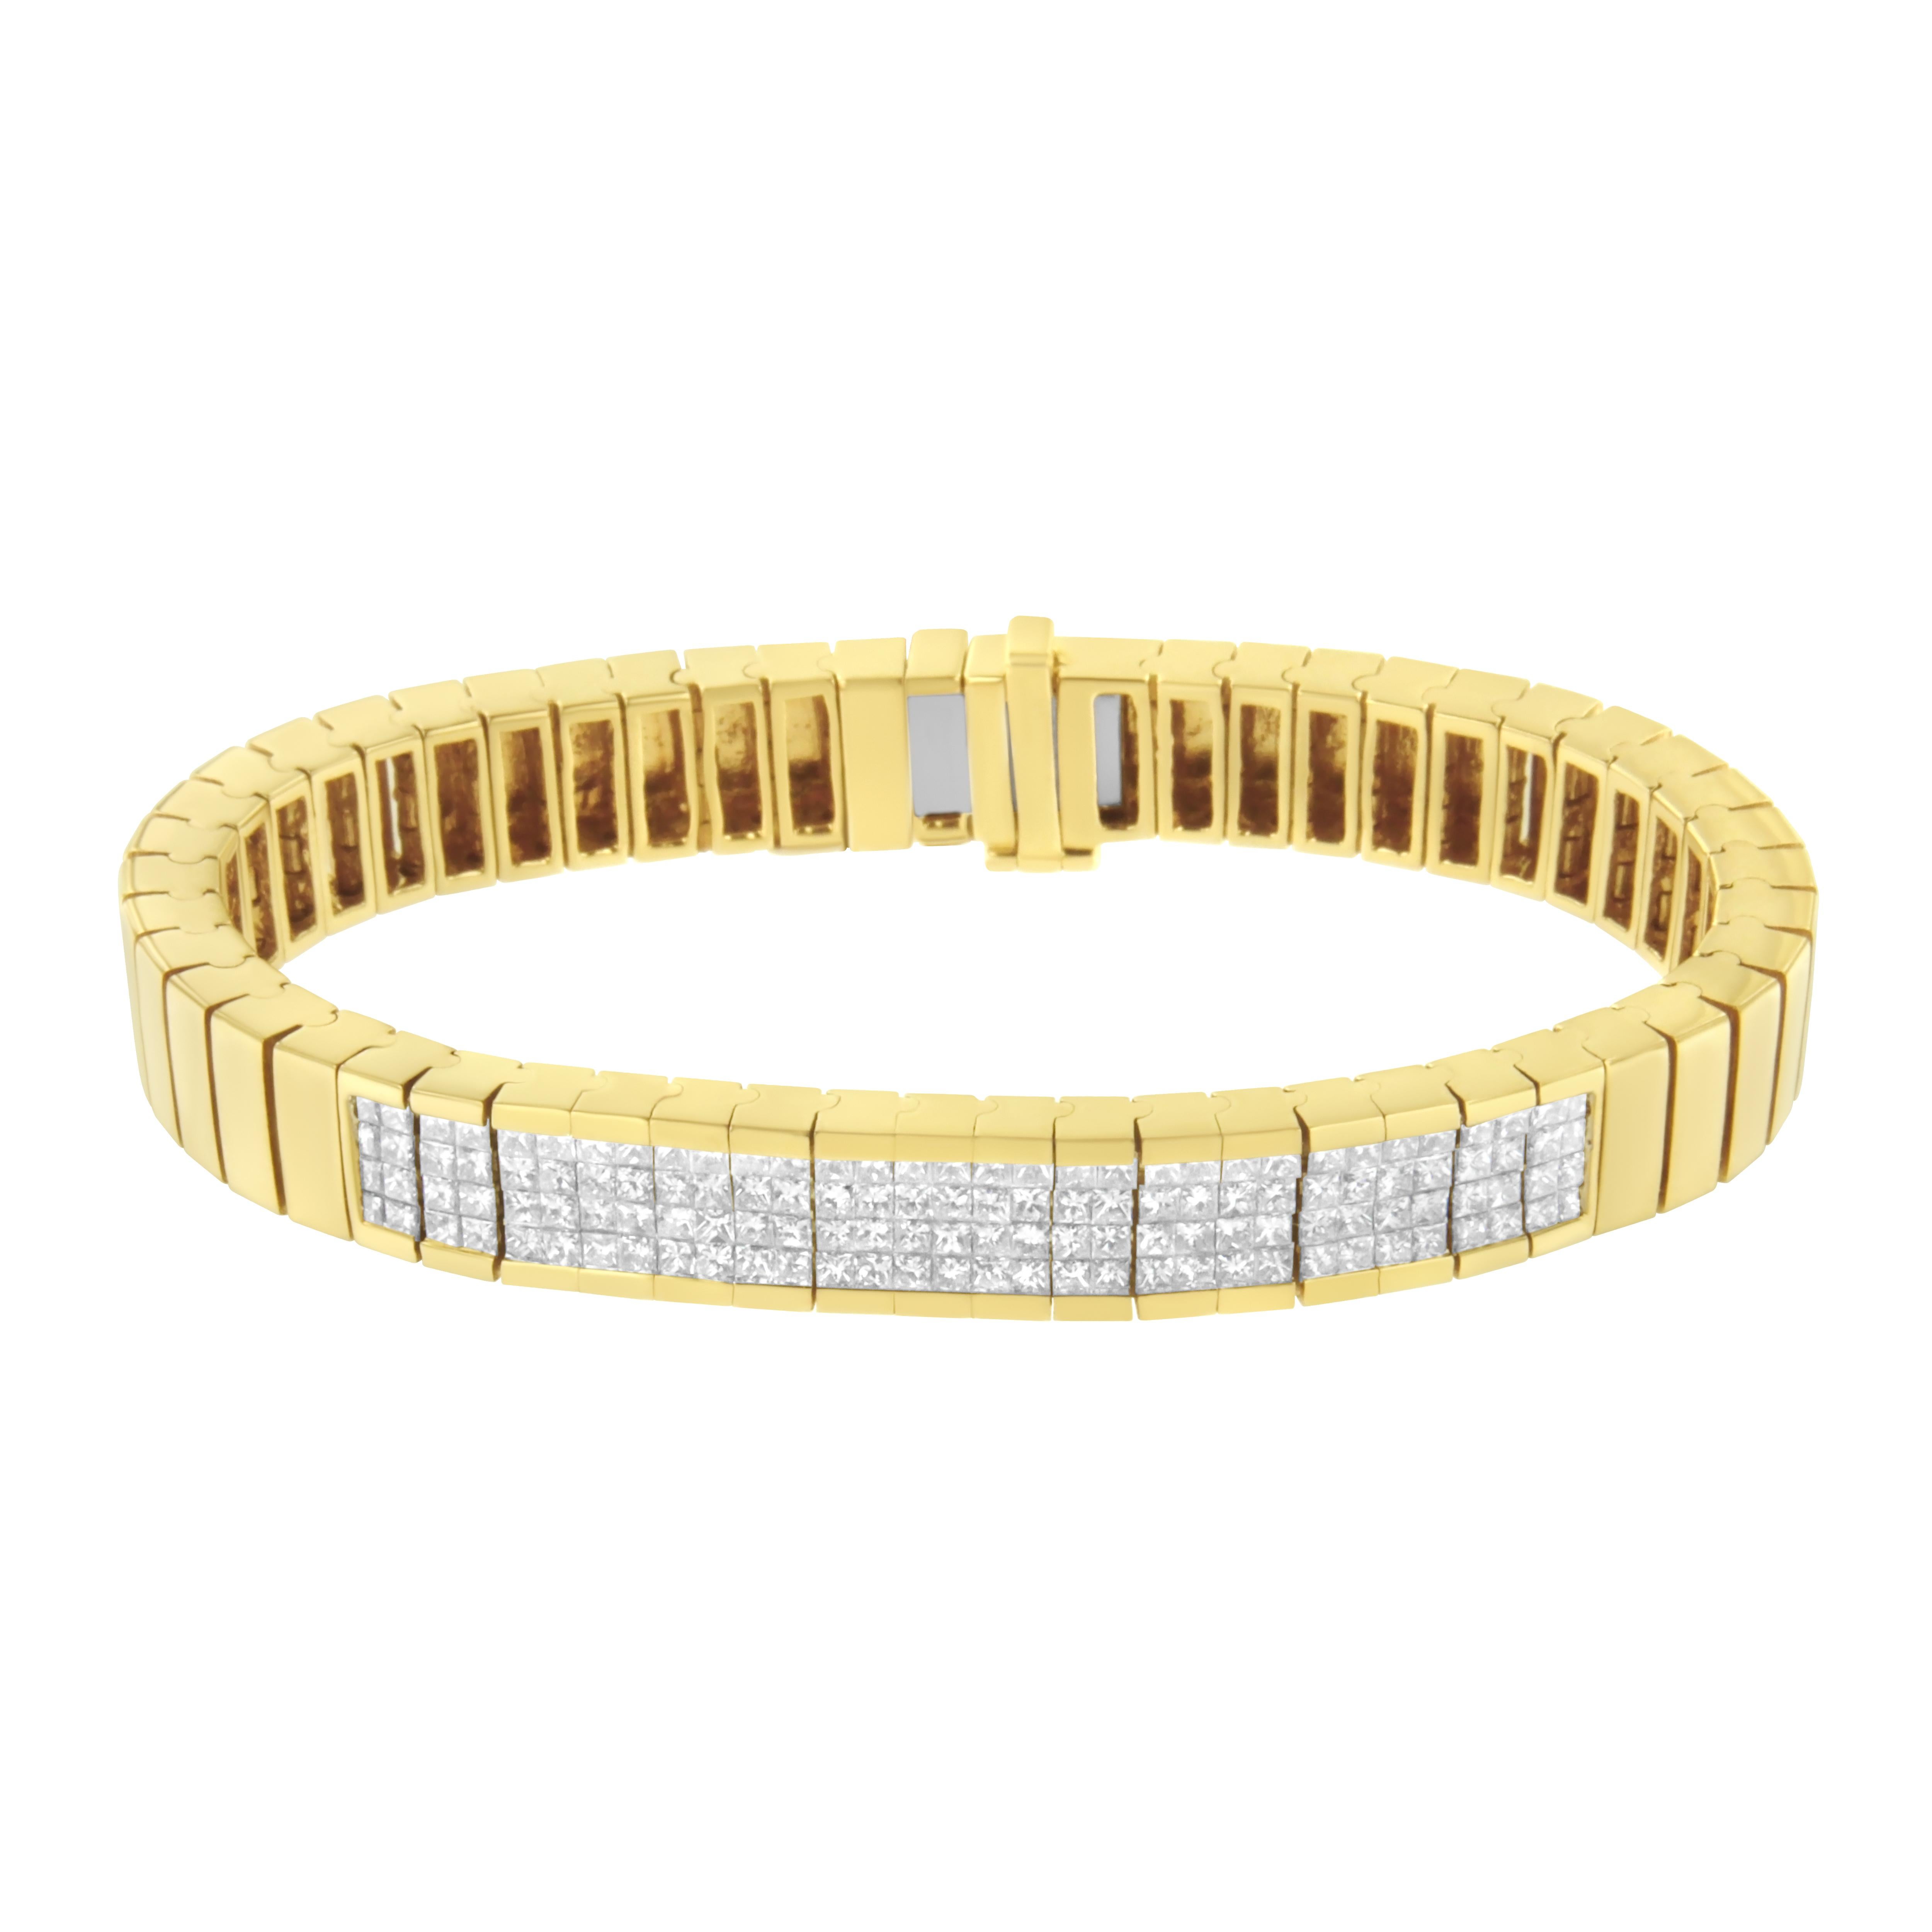 This beautiful bracelet is made in 14k yellow gold and it's inlaid with 3 5/8ct TDW of invisible set princess cut diamonds. 128 shimmering diamonds arranged in four rows inlay the top of this polished yellow gold design. A box clasp mechanism keeps